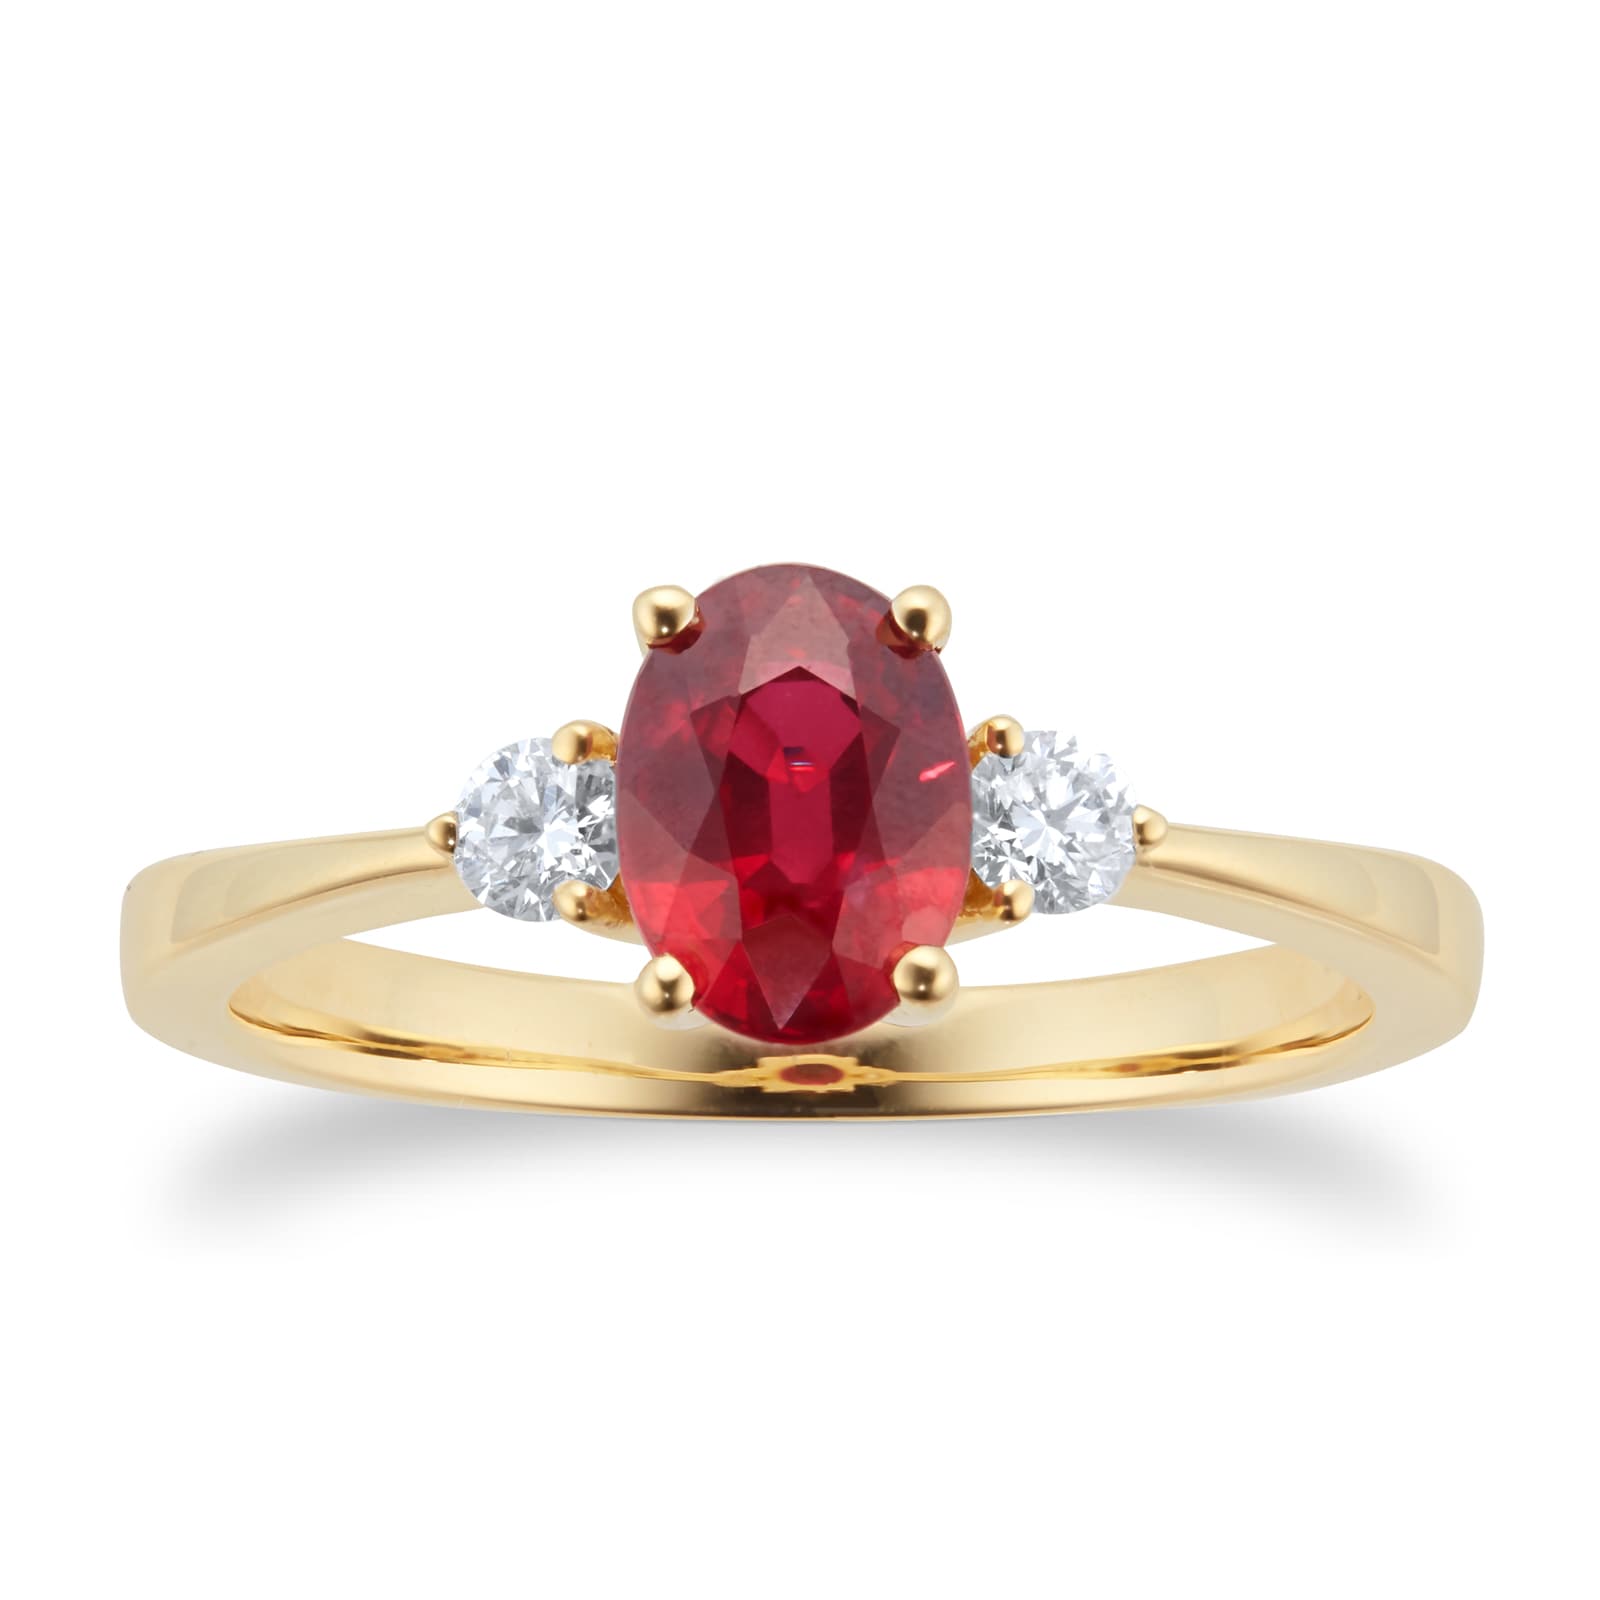 18ct Yellow Gold 1.00ct Oval Cut Ruby & 0.15cttw Diamond Engagement Ring